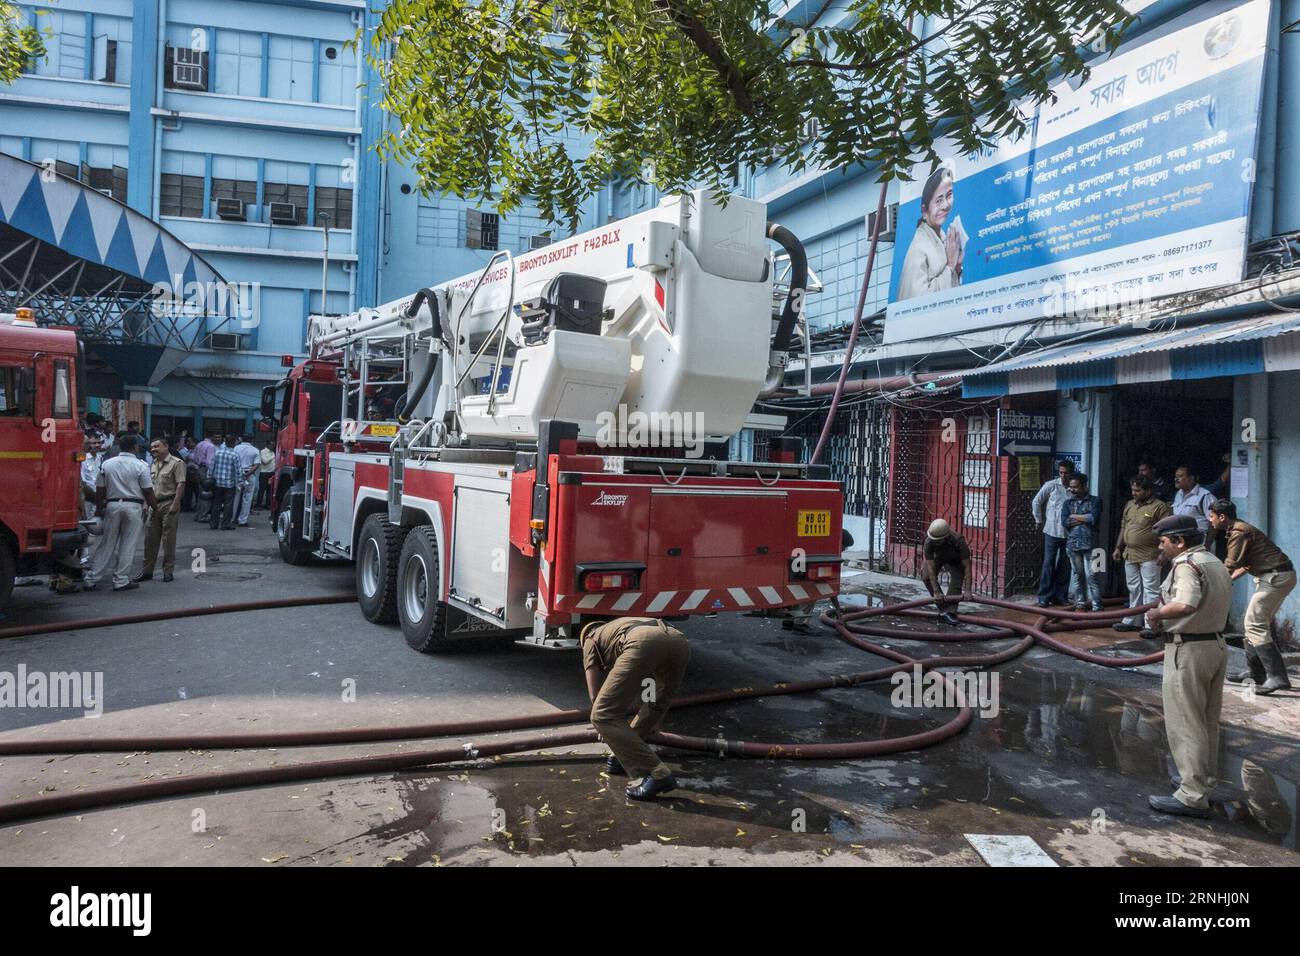 Brand in Krankenhaus in Kalkutta (161121) -- KOLKATA, Nov. 21, 2016 -- Indian fire fighters work around a fire engine at SSKM Hospital in Kolkata, capital of Indian state West Bengal, Nov. 21, 2016. A fire broke out in Kolkata on Monday. Fire brigade sources said at least sixteen fire engines were pressed in to douse the fire and some patients were shifted. There were no reports of casualties yet. ) (wtc) INDIA-KOLKATA-SSKM HOSPITAL-FIRE TumpaxMondal PUBLICATIONxNOTxINxCHN   Brand in Hospital in Calcutta  Kolkata Nov 21 2016 Indian Fire Fighters Work Around a Fire Engine AT SSKM Hospital in Ko Stock Photo